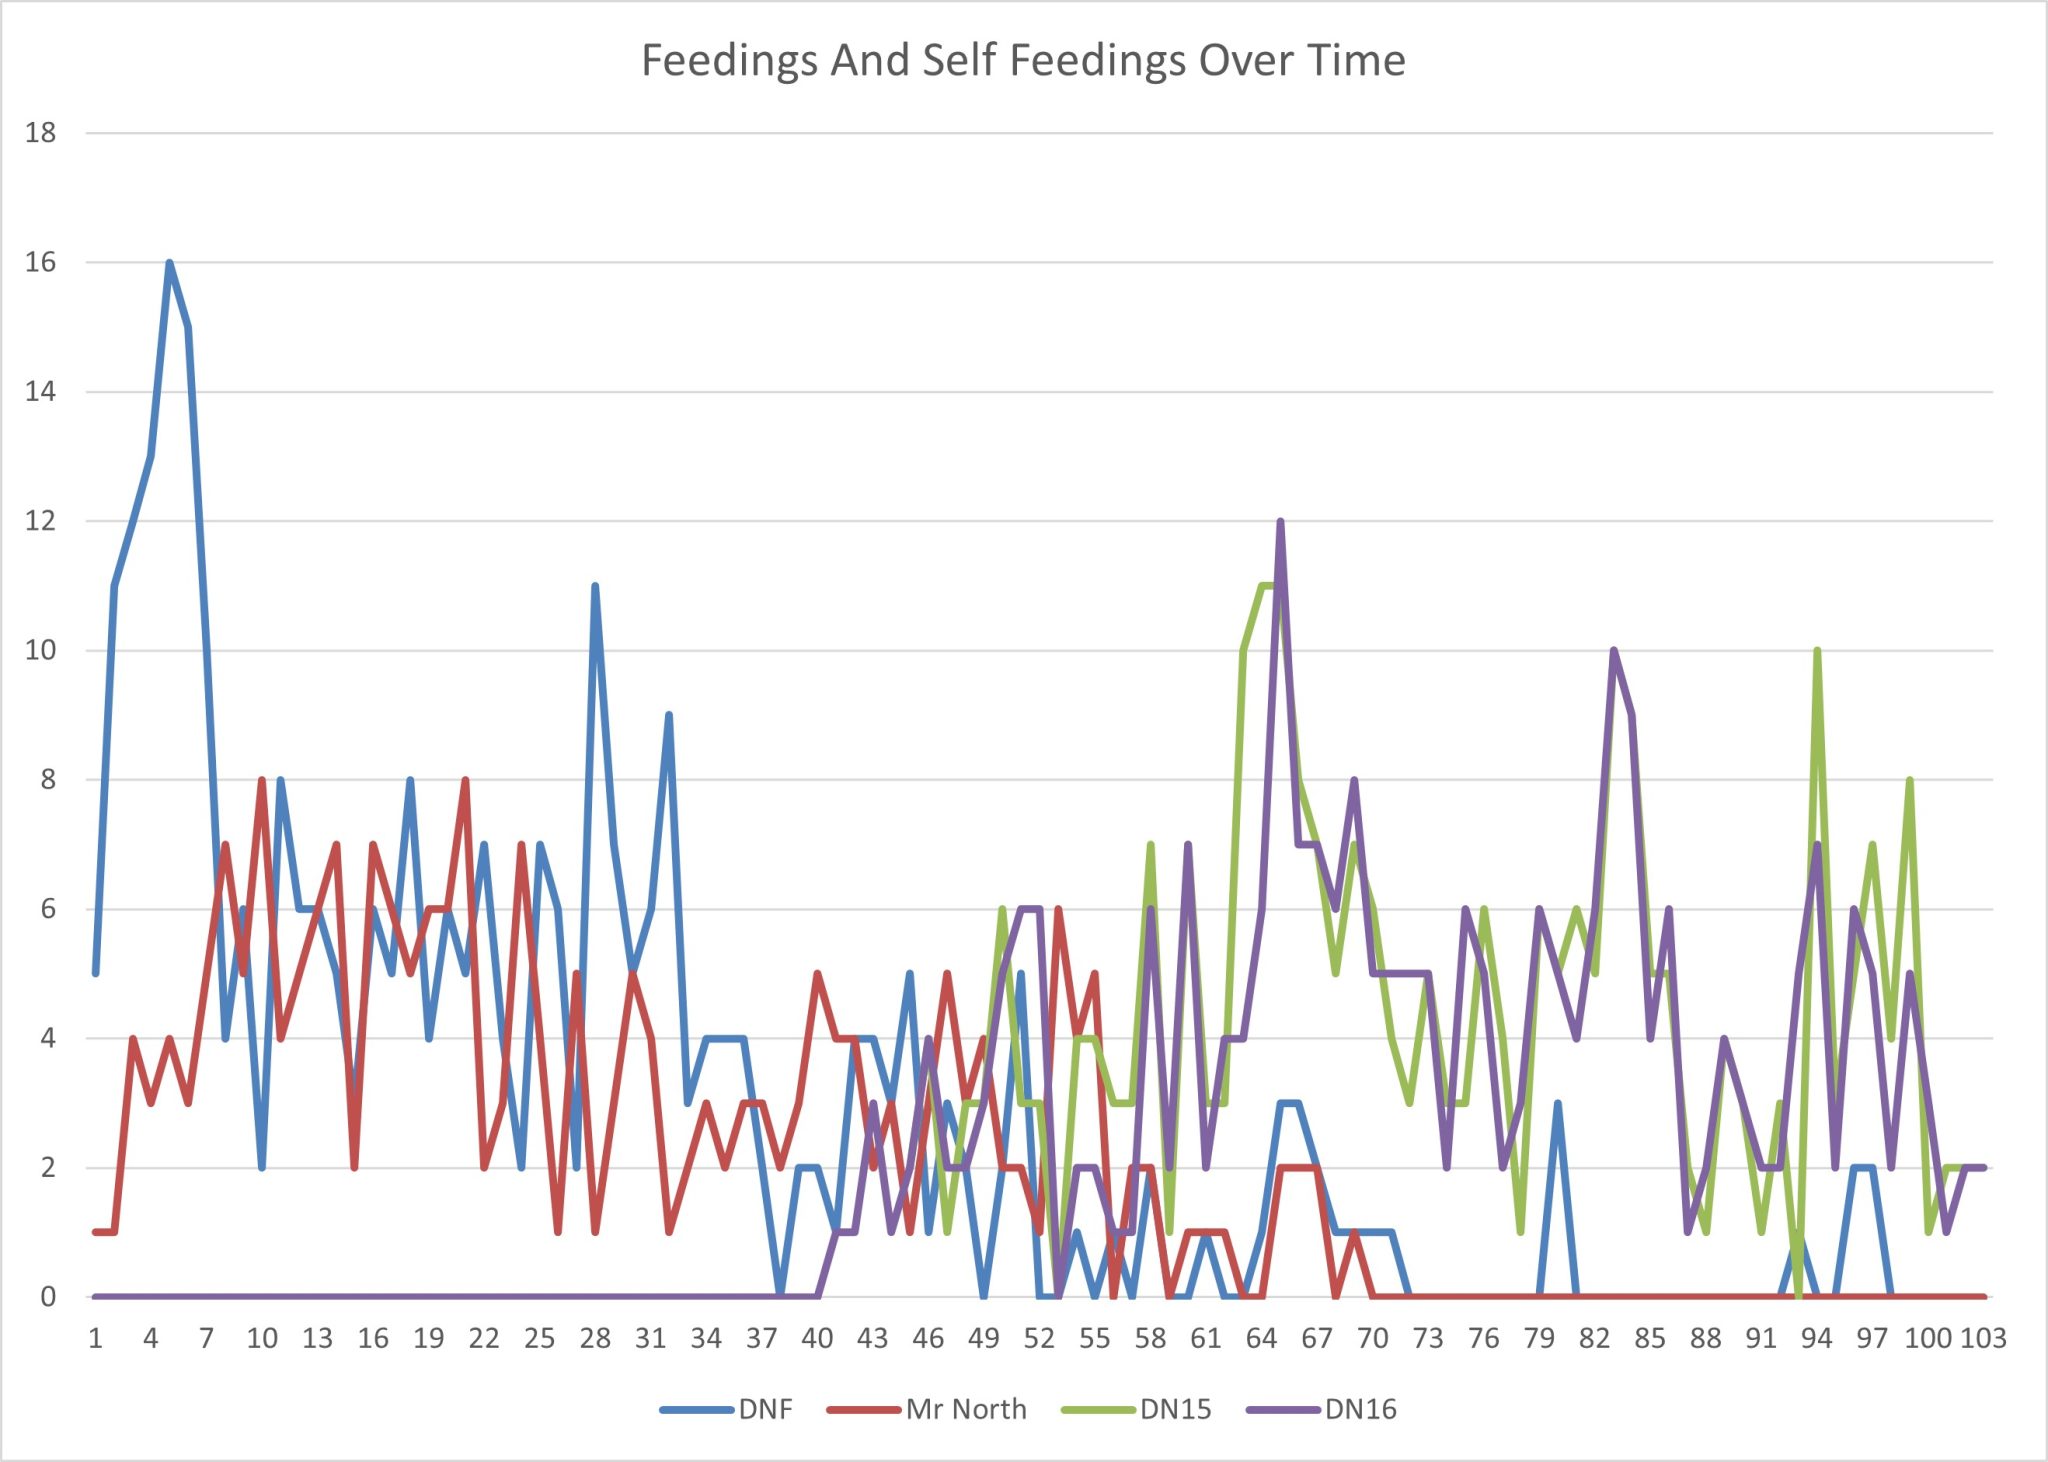 Feedings and Self-Feedings at the North Nest